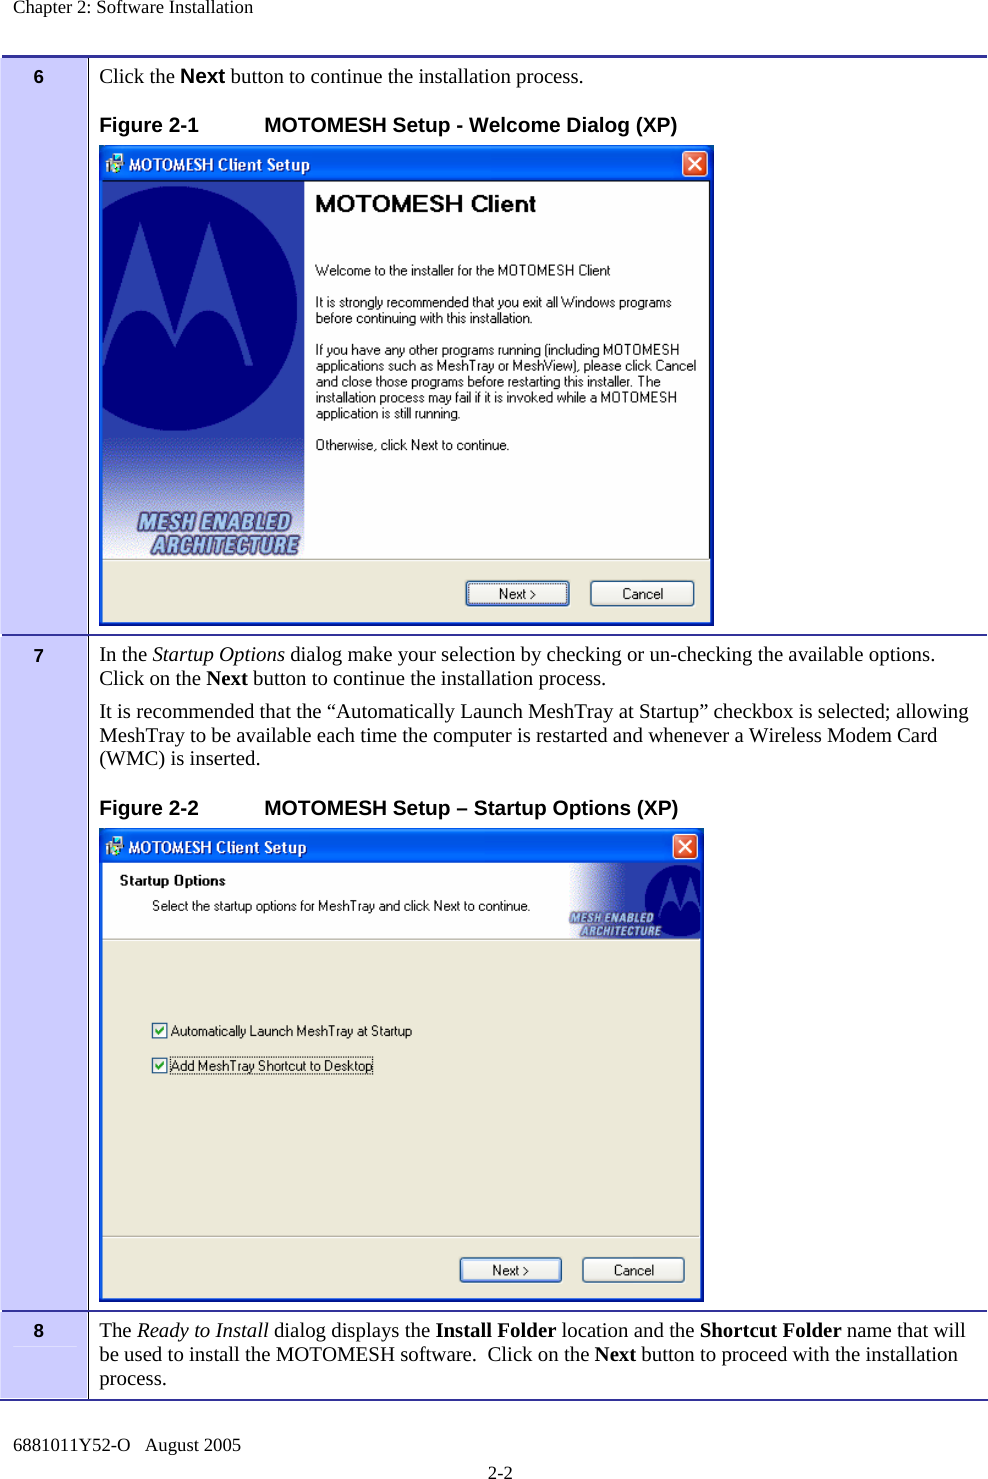 Chapter 2: Software Installation 6881011Y52-O   August 2005 2-2 6   Click the Next button to continue the installation process. Figure 2-1  MOTOMESH Setup - Welcome Dialog (XP)  7   In the Startup Options dialog make your selection by checking or un-checking the available options.  Click on the Next button to continue the installation process. It is recommended that the “Automatically Launch MeshTray at Startup” checkbox is selected; allowing MeshTray to be available each time the computer is restarted and whenever a Wireless Modem Card (WMC) is inserted. Figure 2-2  MOTOMESH Setup – Startup Options (XP)  8   The Ready to Install dialog displays the Install Folder location and the Shortcut Folder name that will be used to install the MOTOMESH software.  Click on the Next button to proceed with the installation process.   